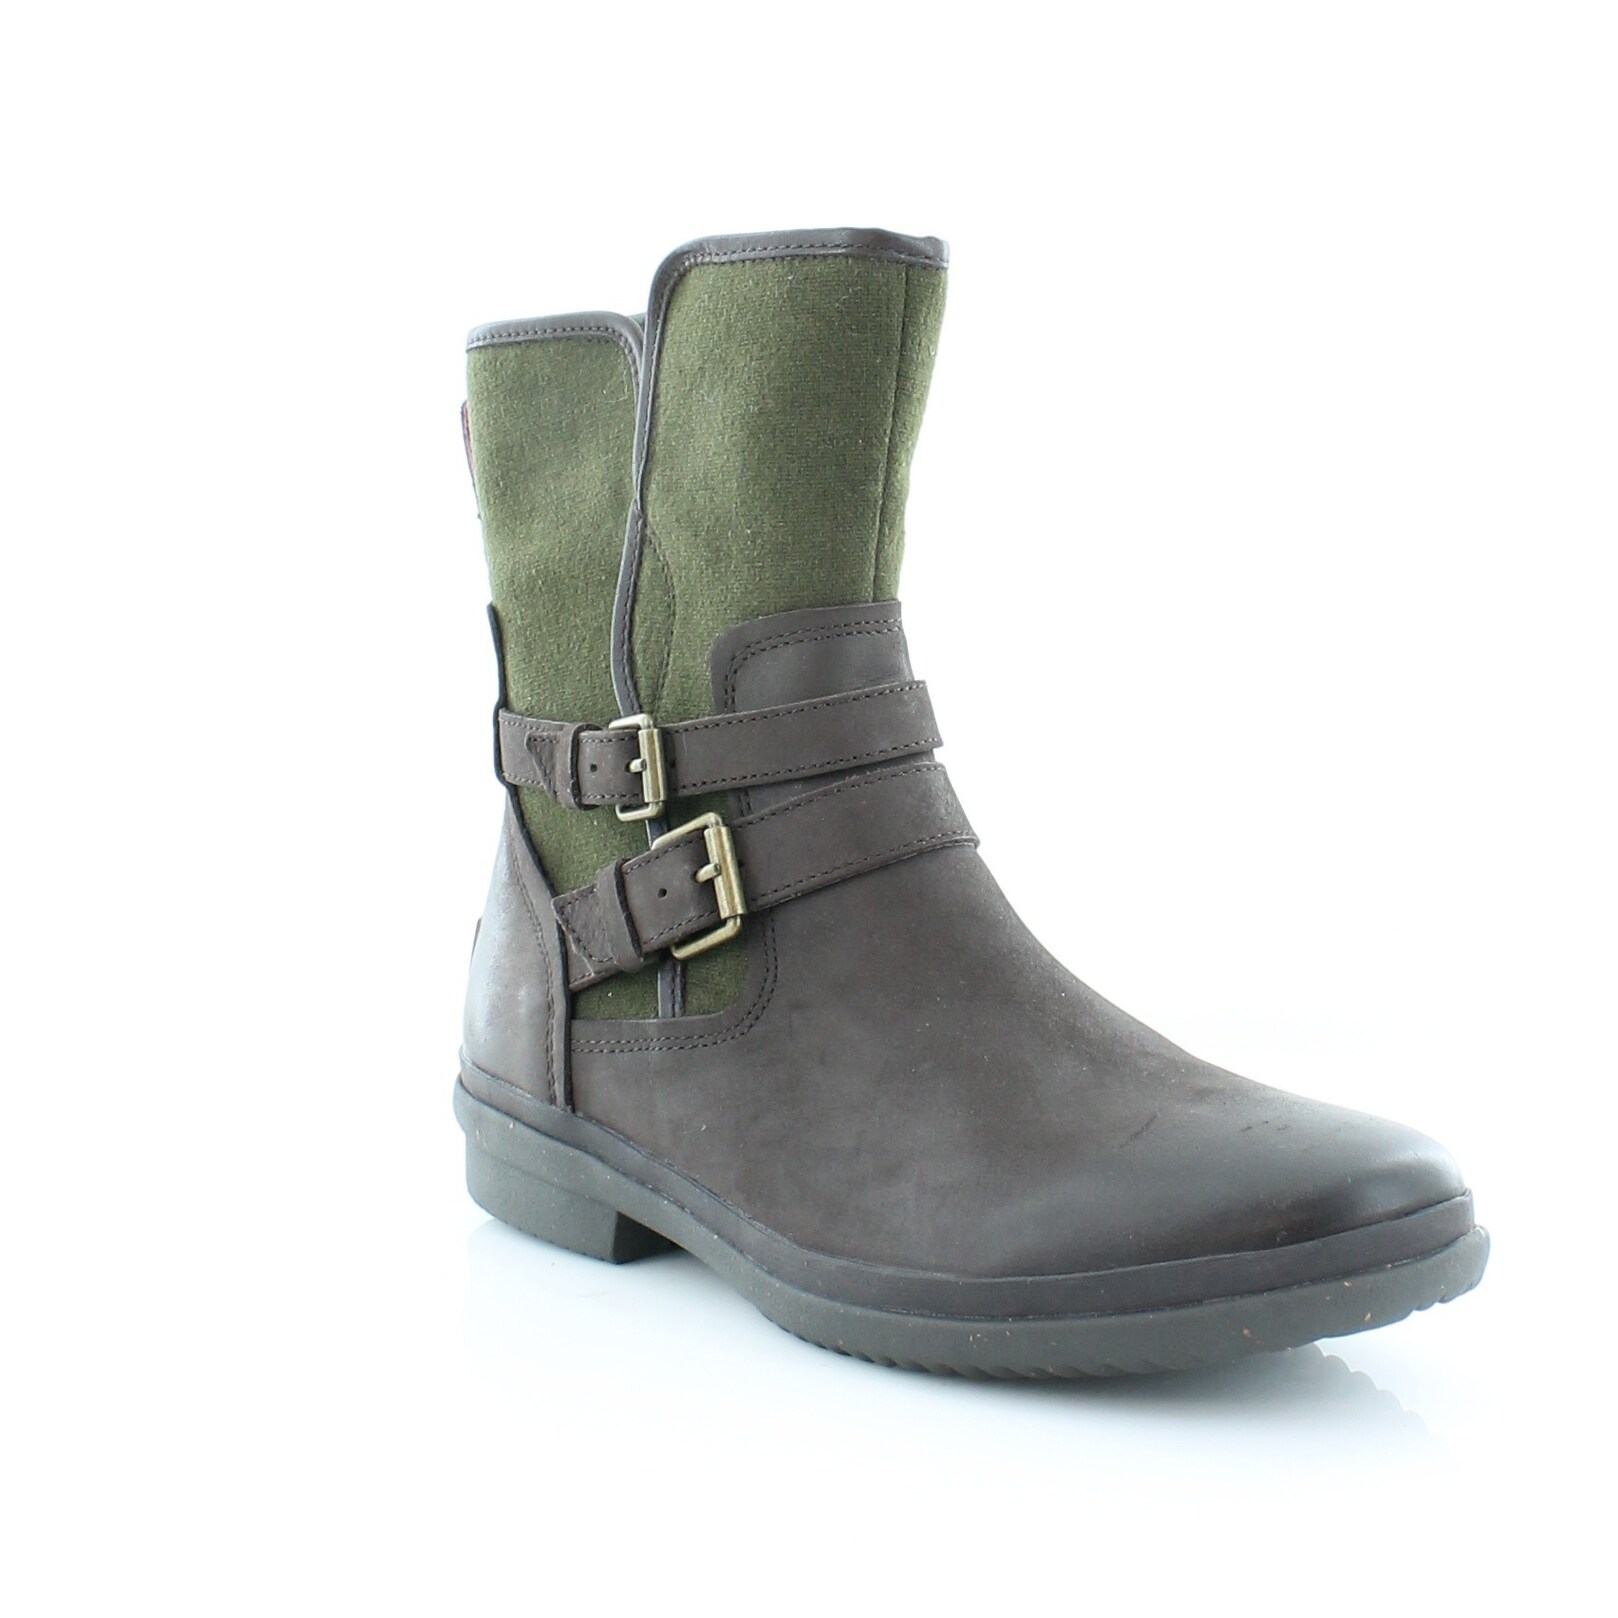 overstock ugg boots